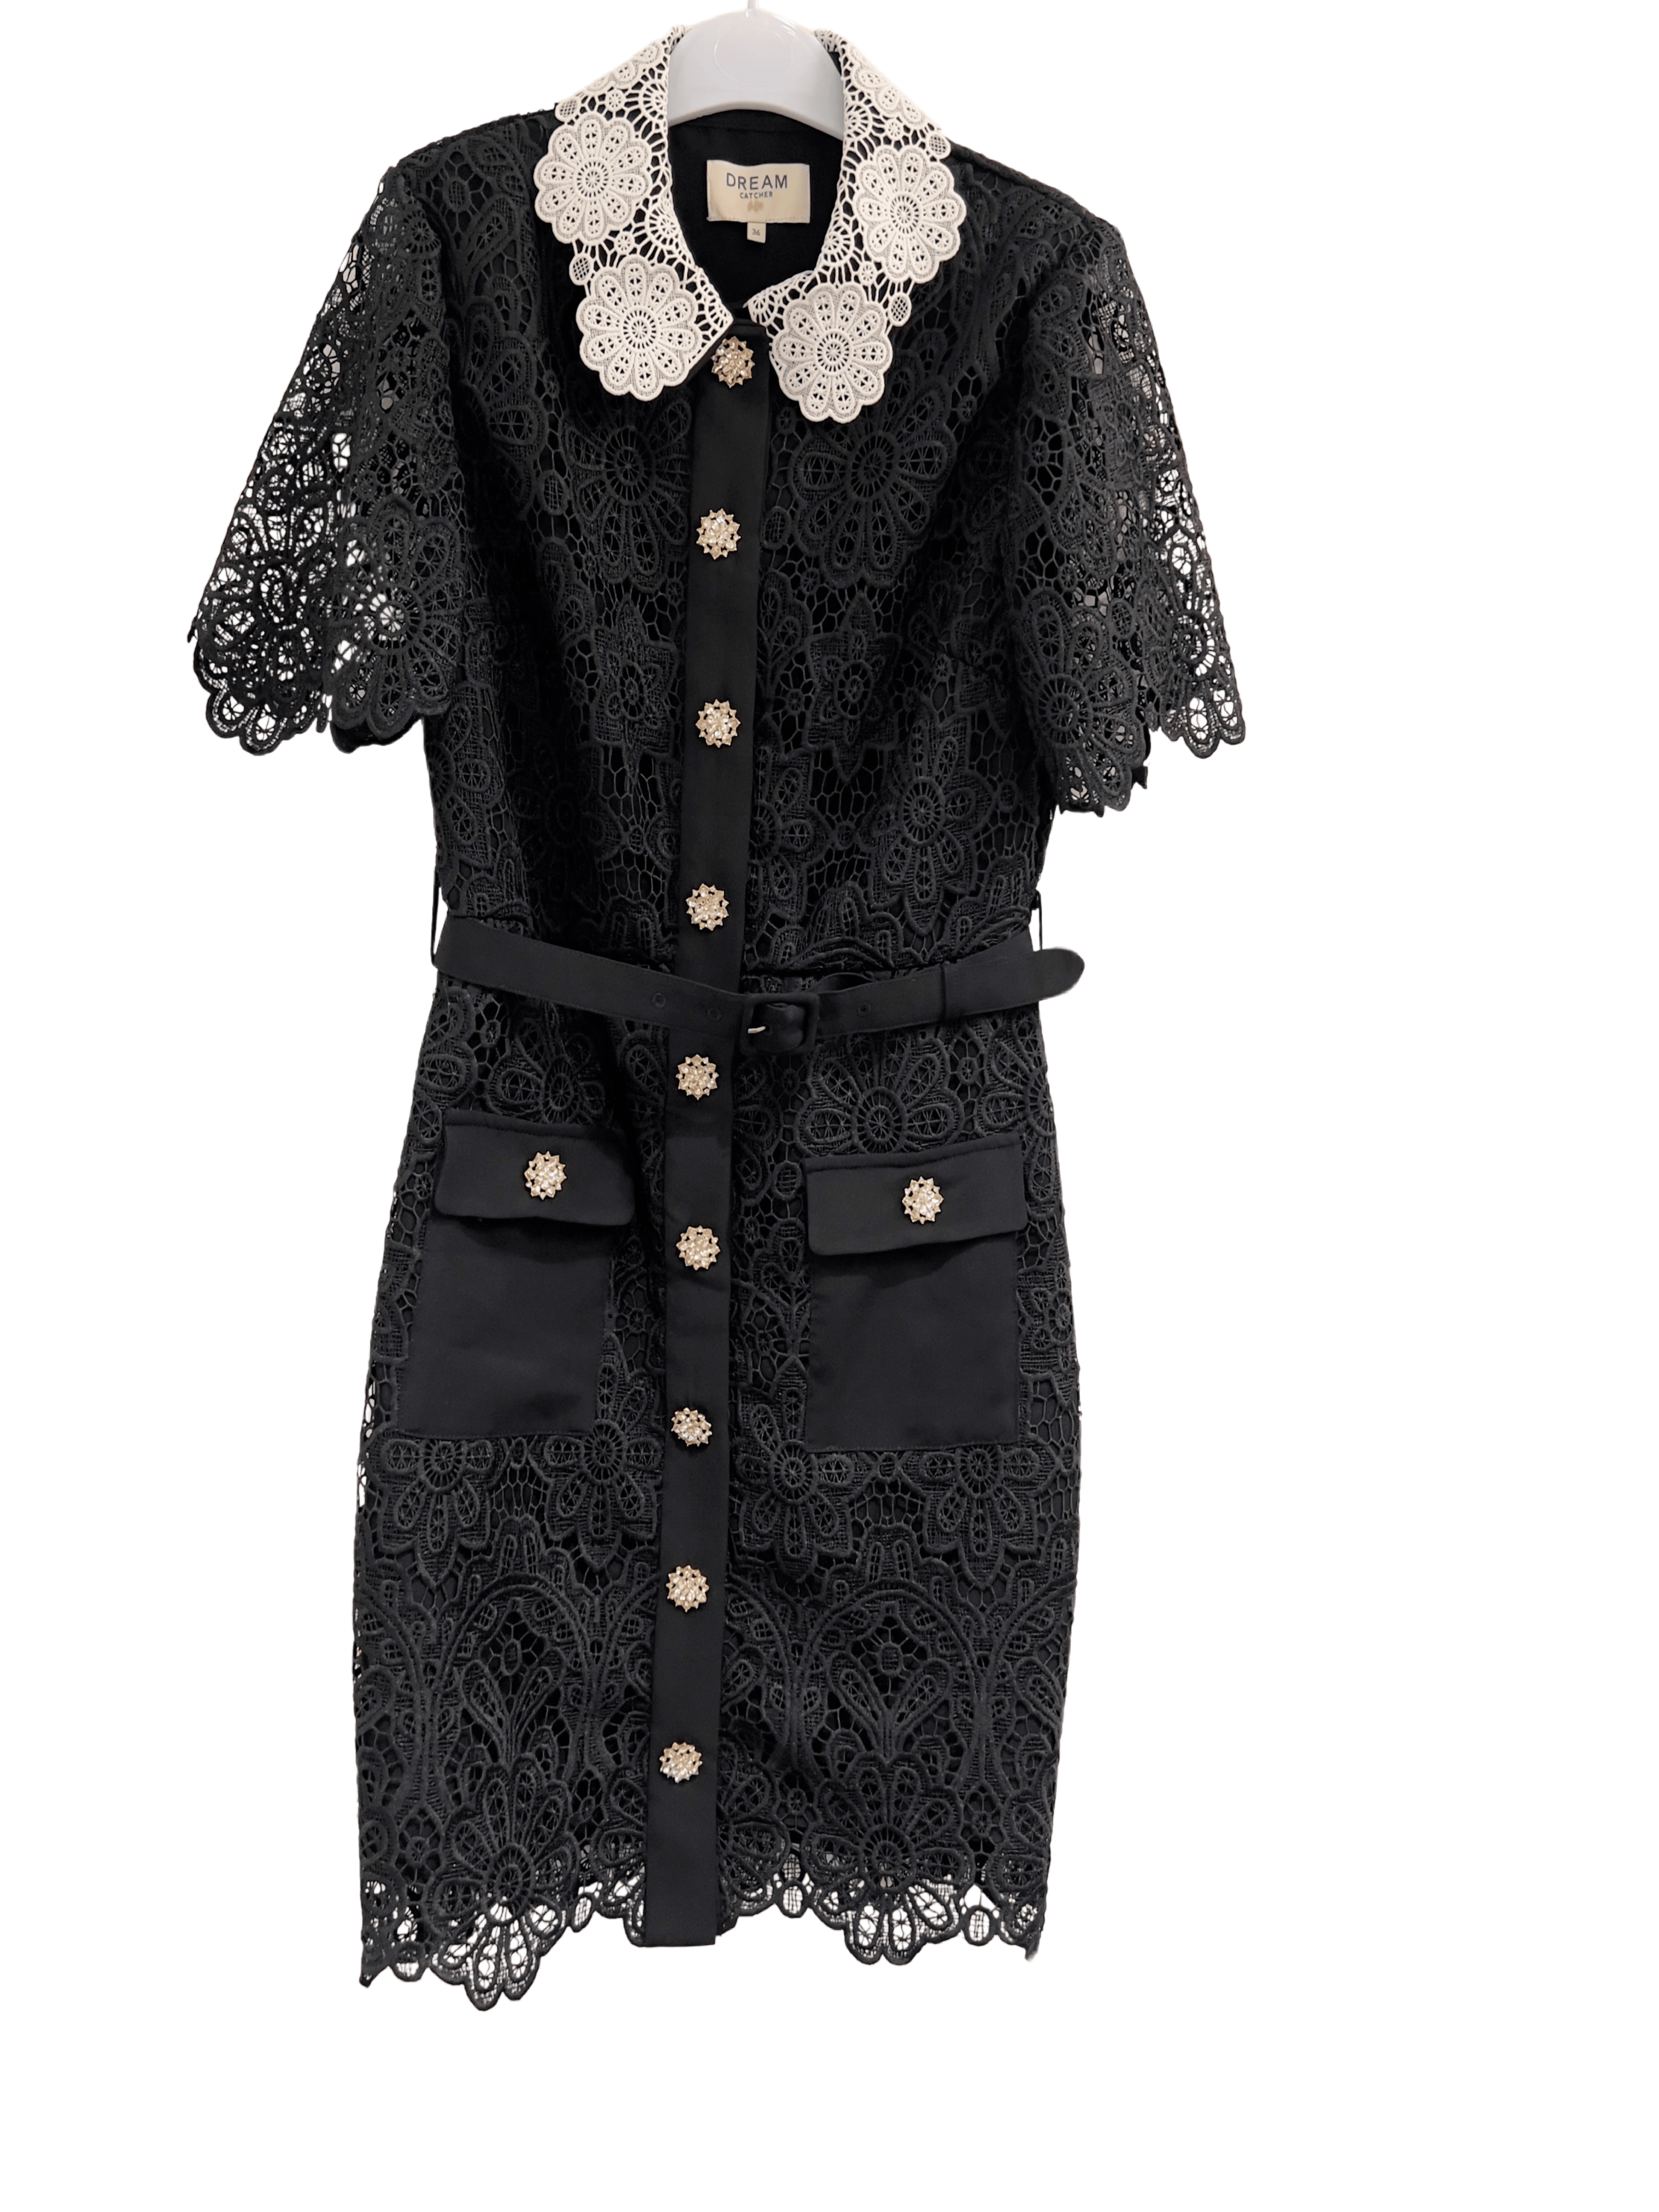 Elegant black lace dress with a distinctive white lace collar, short lace sleeves, and a row of decorative buttons down the front, displayed on a hanger -BTK COLLECTION